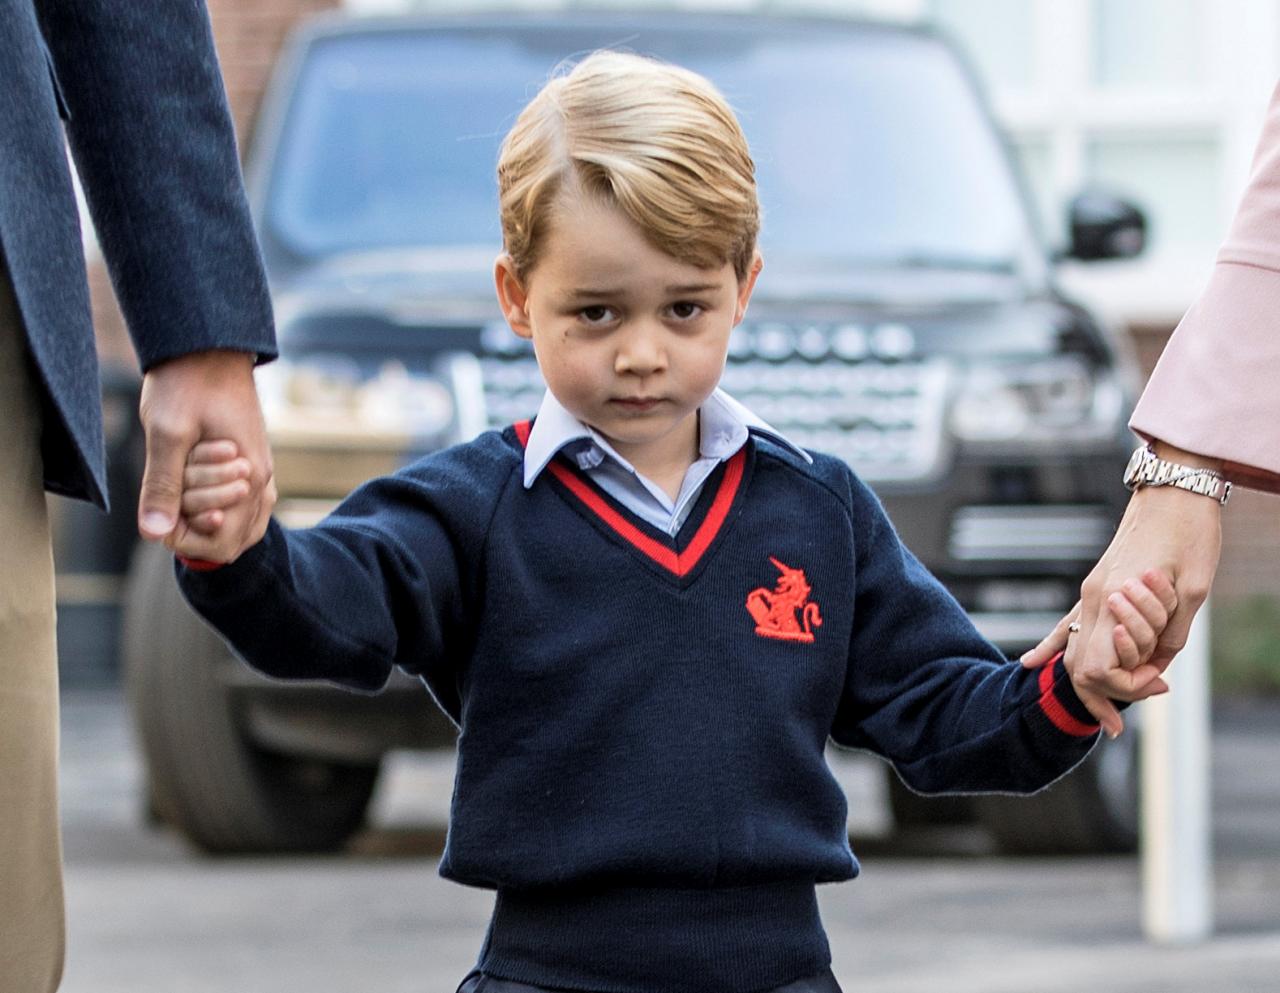 scottish priest hopes for gay prince george